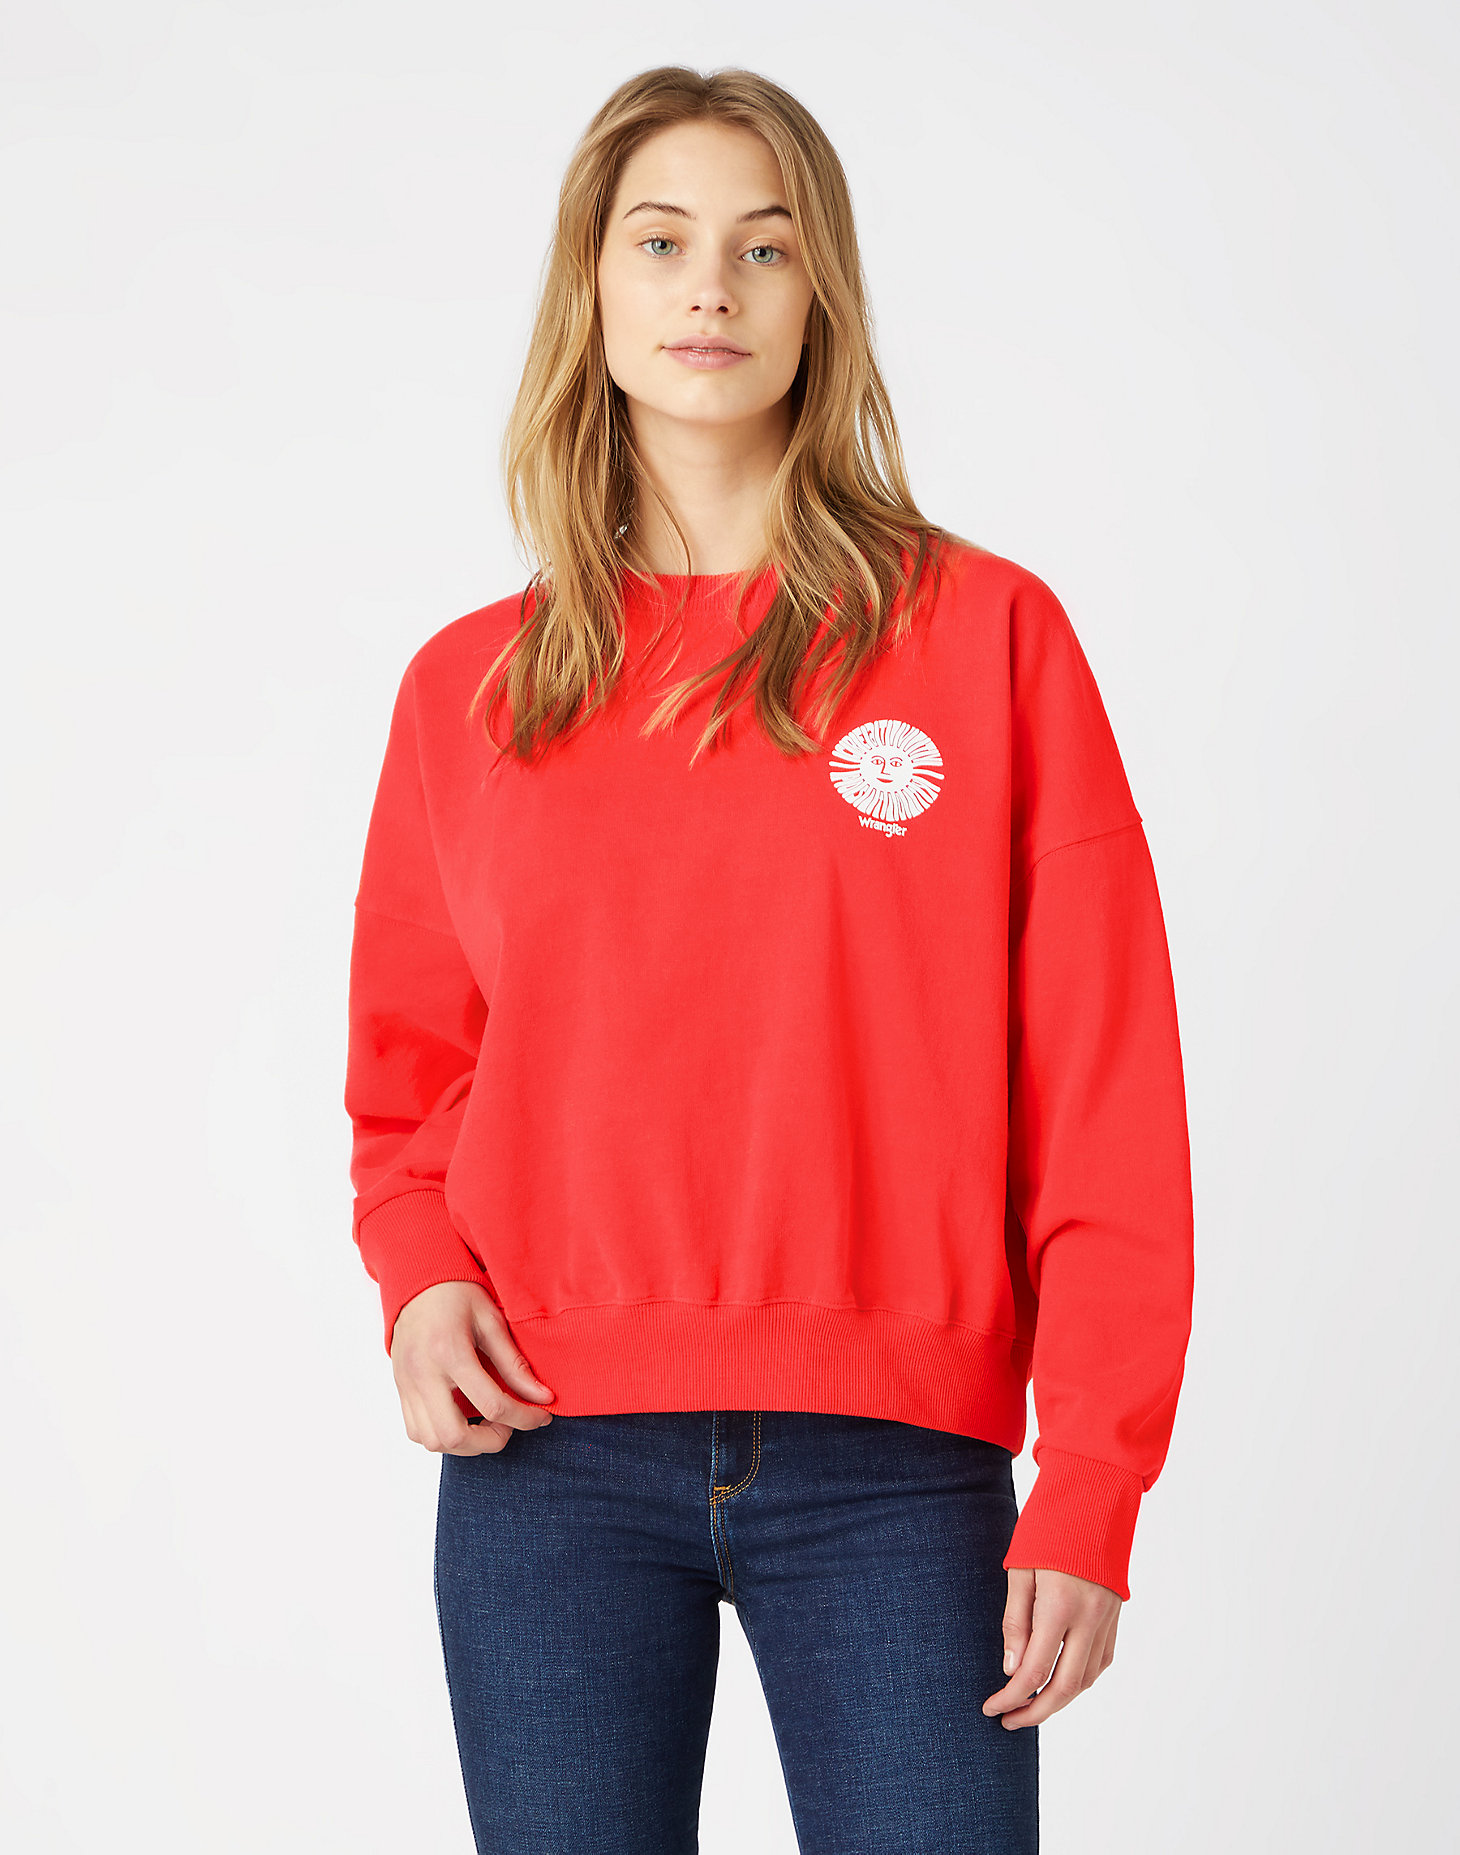 Relaxed Sweatshirt in Poppy Red main view